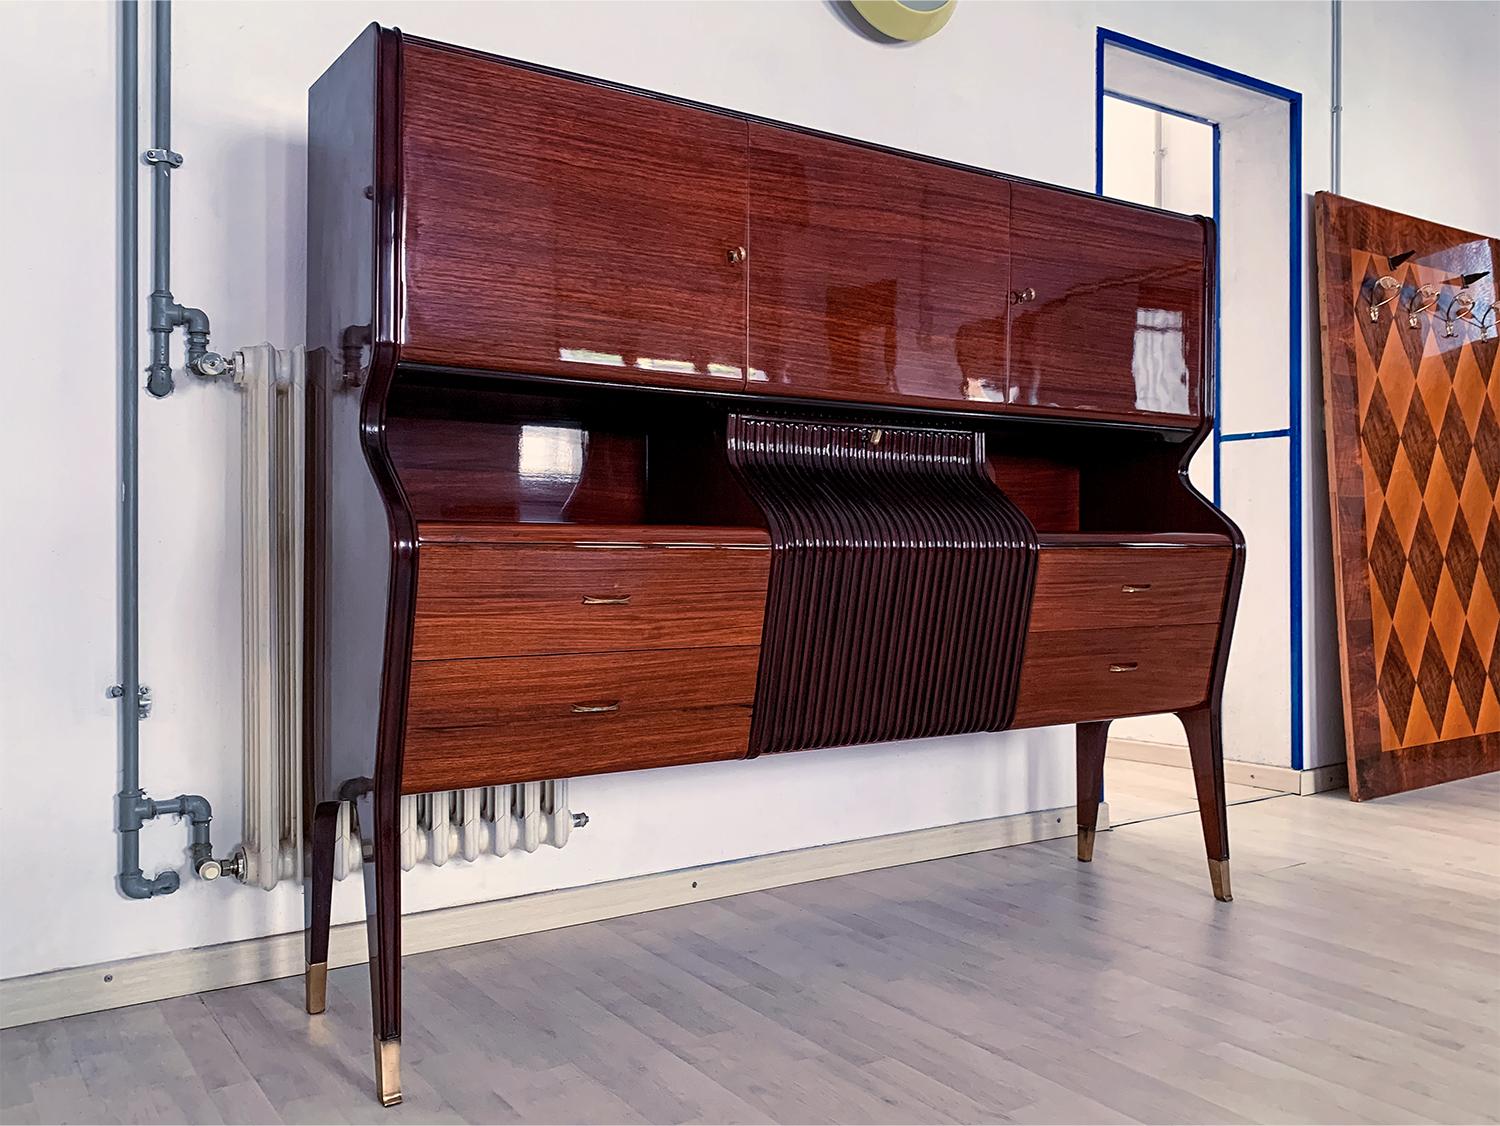 Stylish sideboard and/or bar cabinet designed by Osvaldo Borsani in the 1950s.
Its structure is characterized by a unique shape design given by its amazing curved frontal profile of the central drop-down door, very refined and finished with